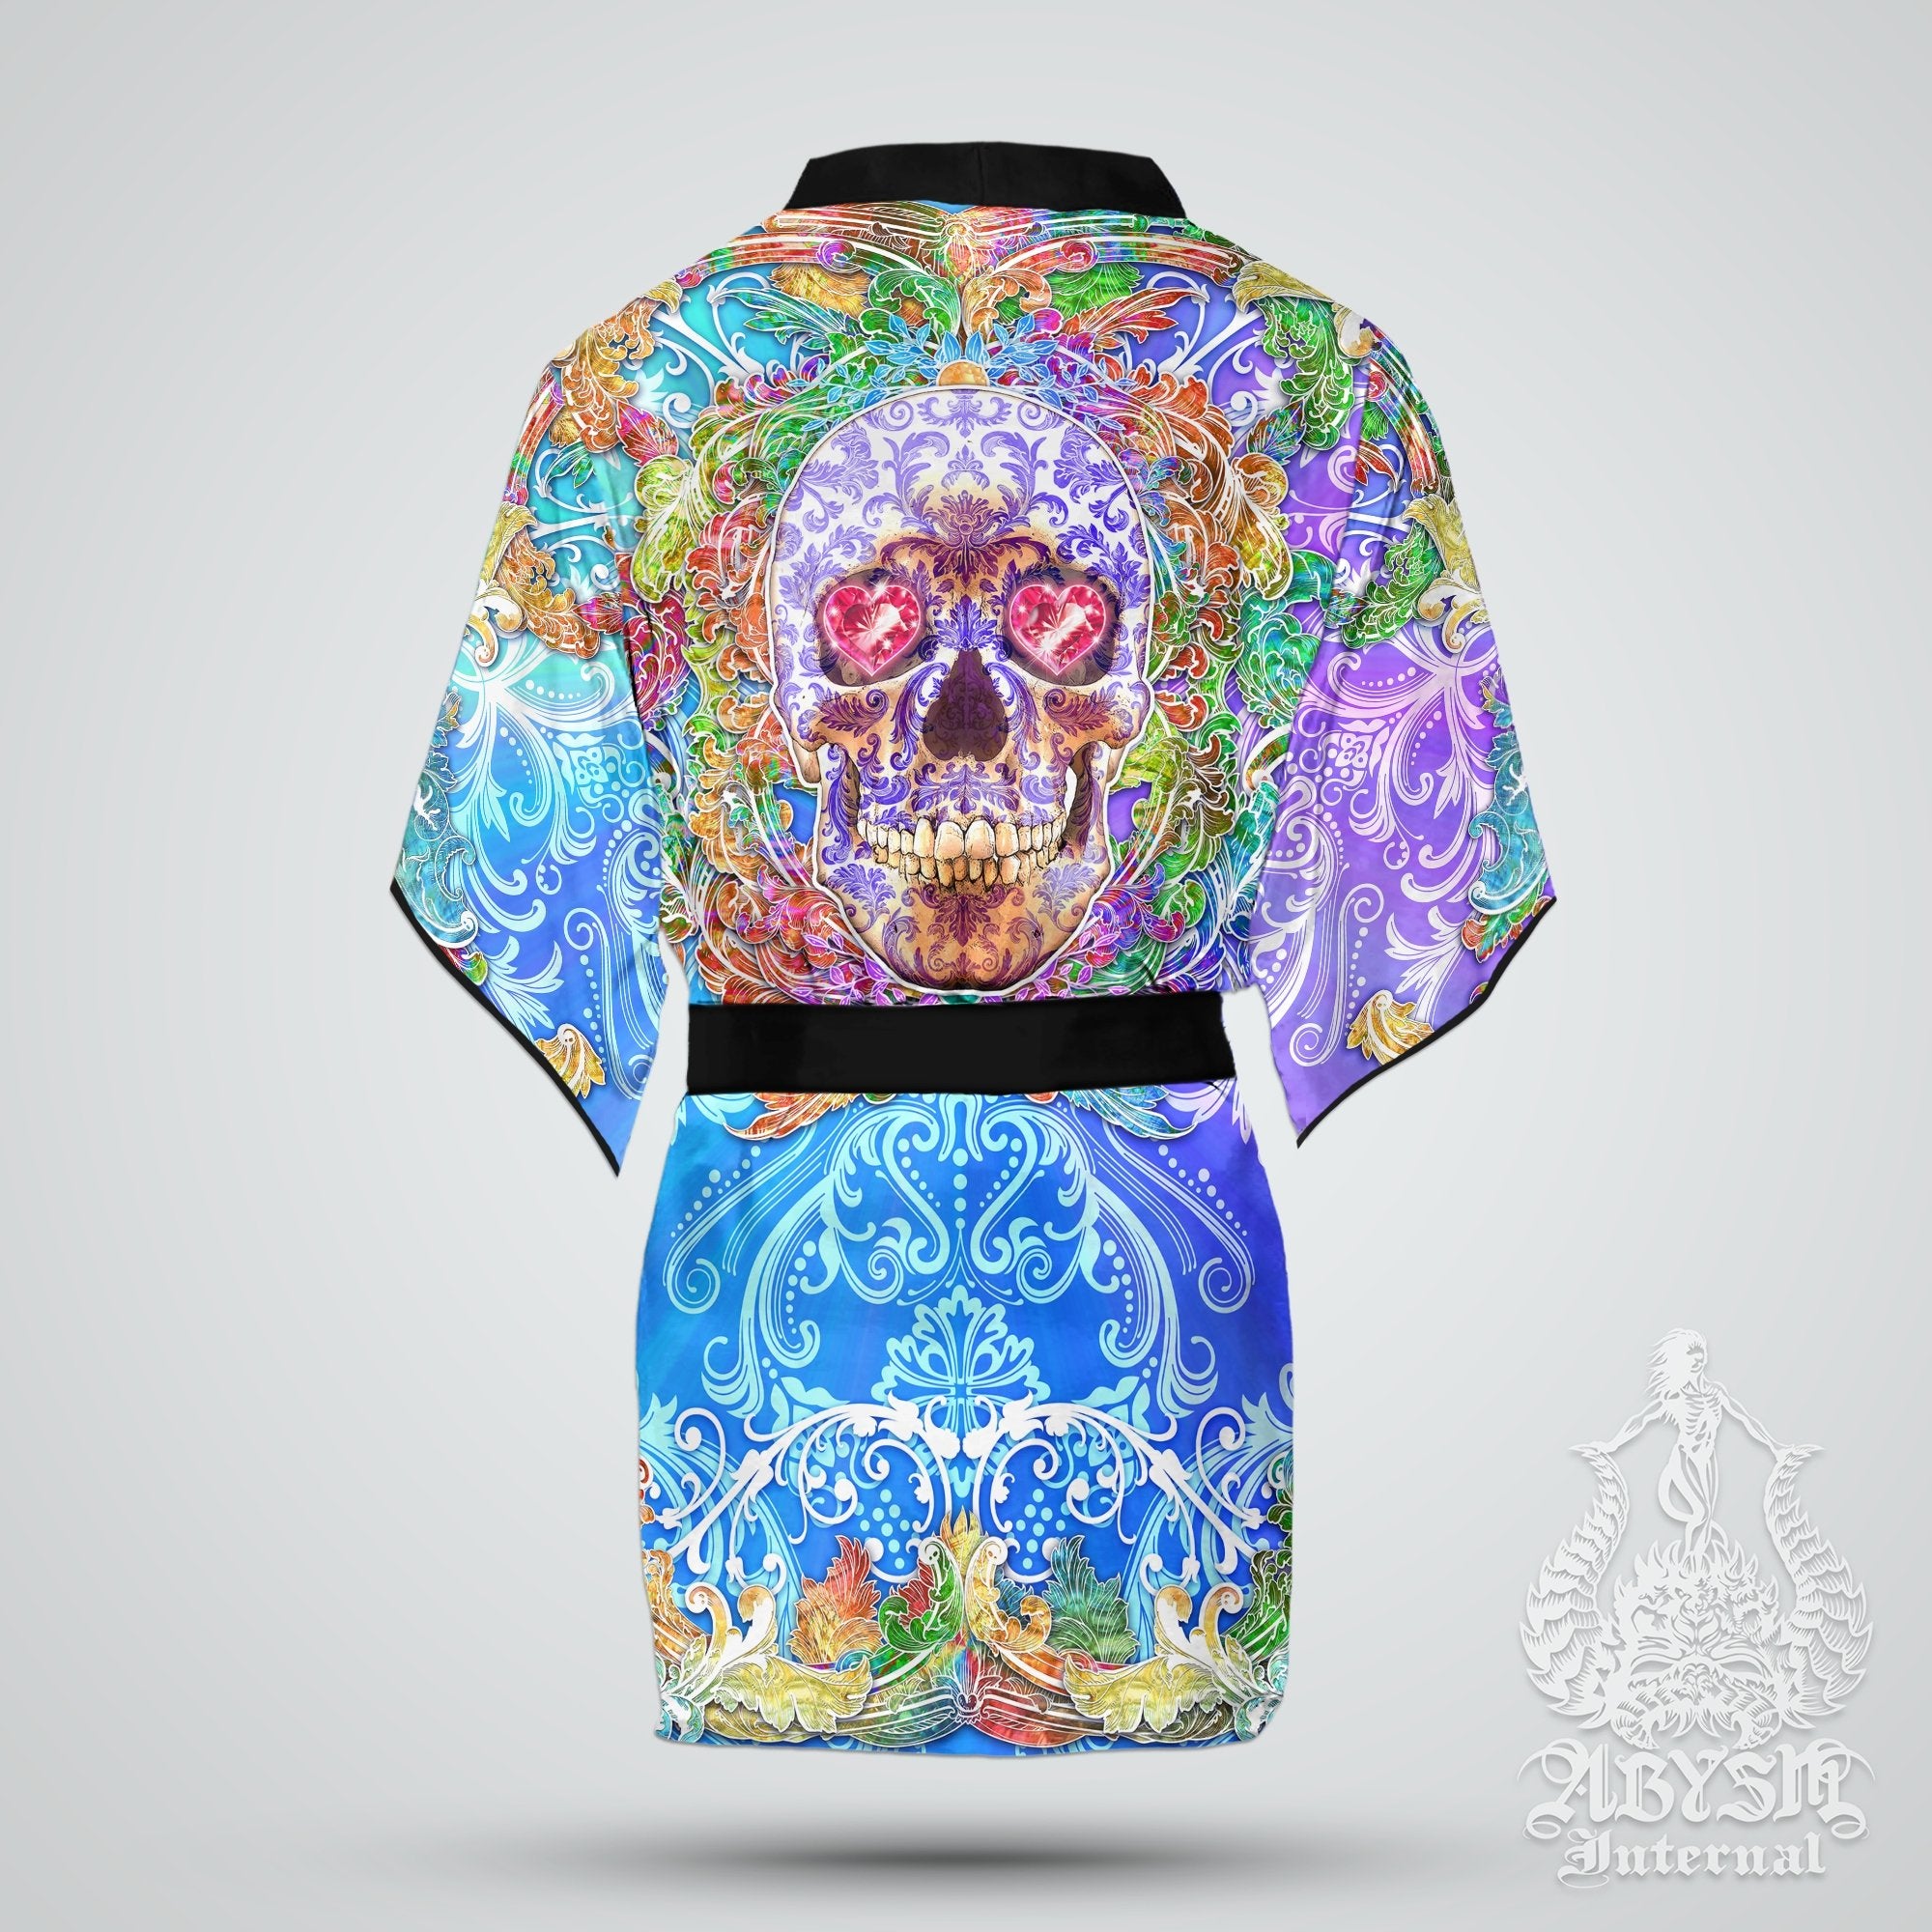 Skull Cover Up, Beach Outfit, Party Kimono, Boho Summer Festival Robe, Indie and Alternative Clothing, Unisex - Psy Purple - Abysm Internal